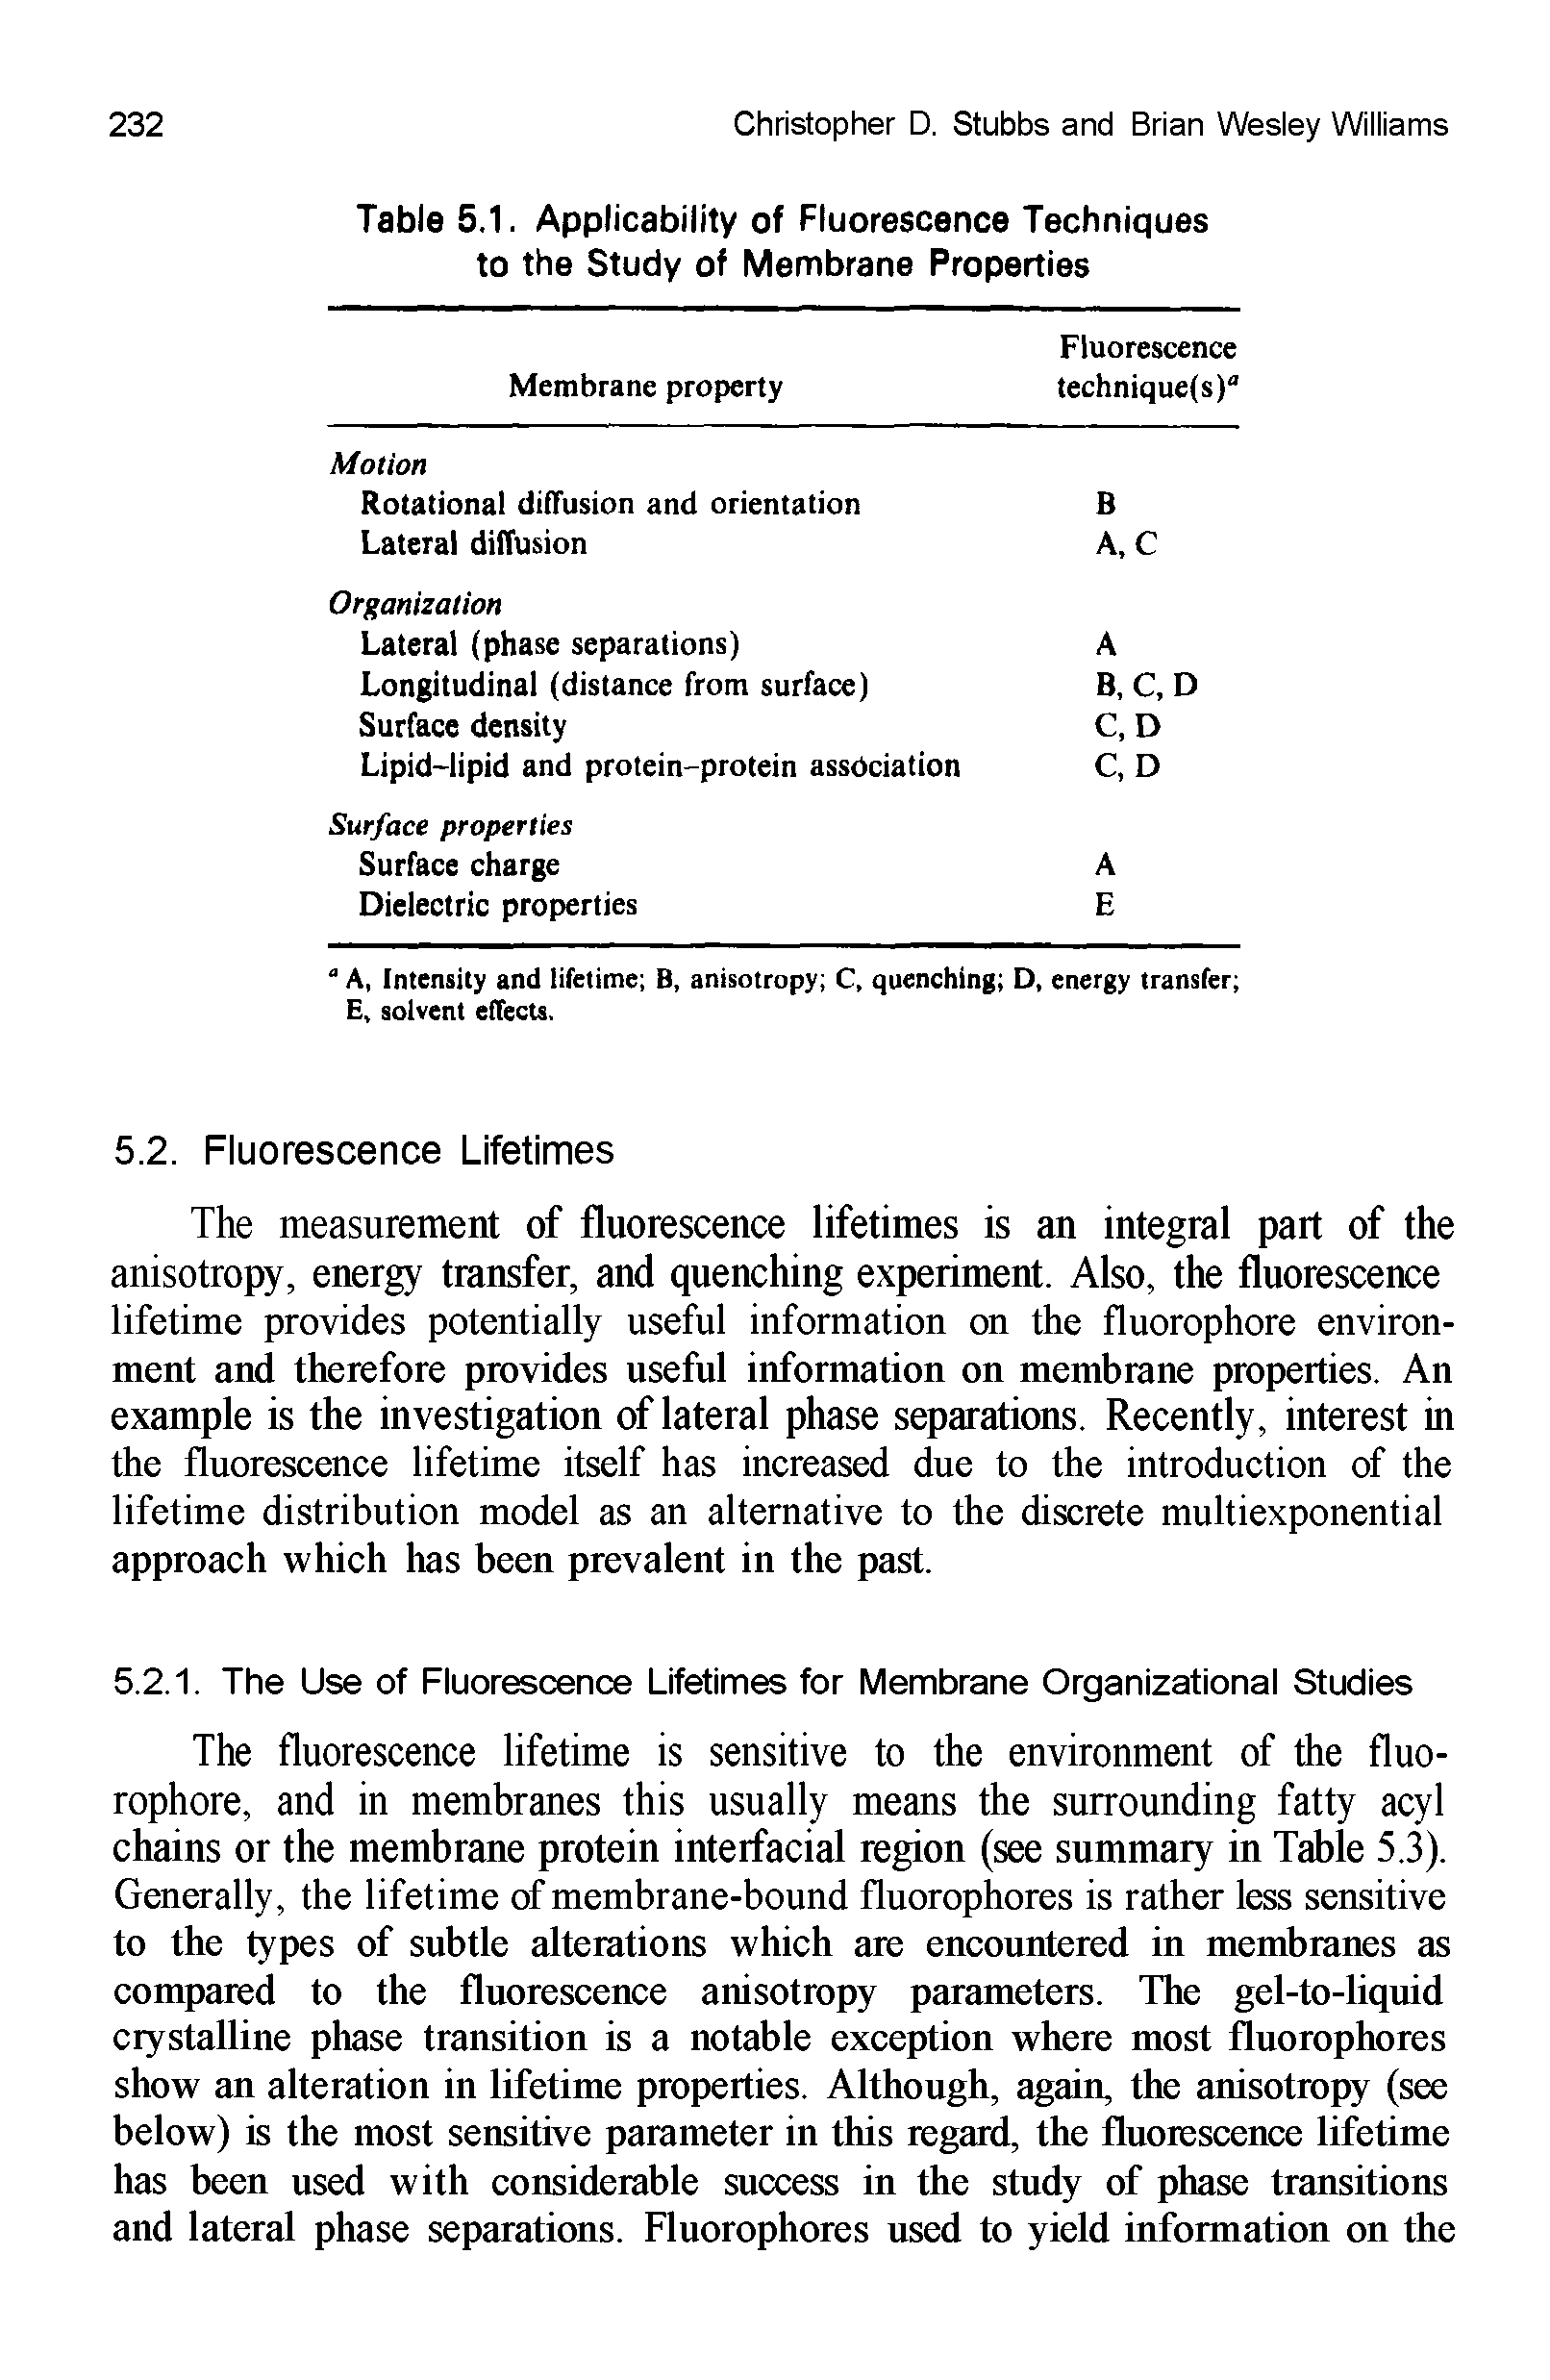 Table 5.1. Applicability of Fluorescence Techniques to the Study of Membrane Properties...